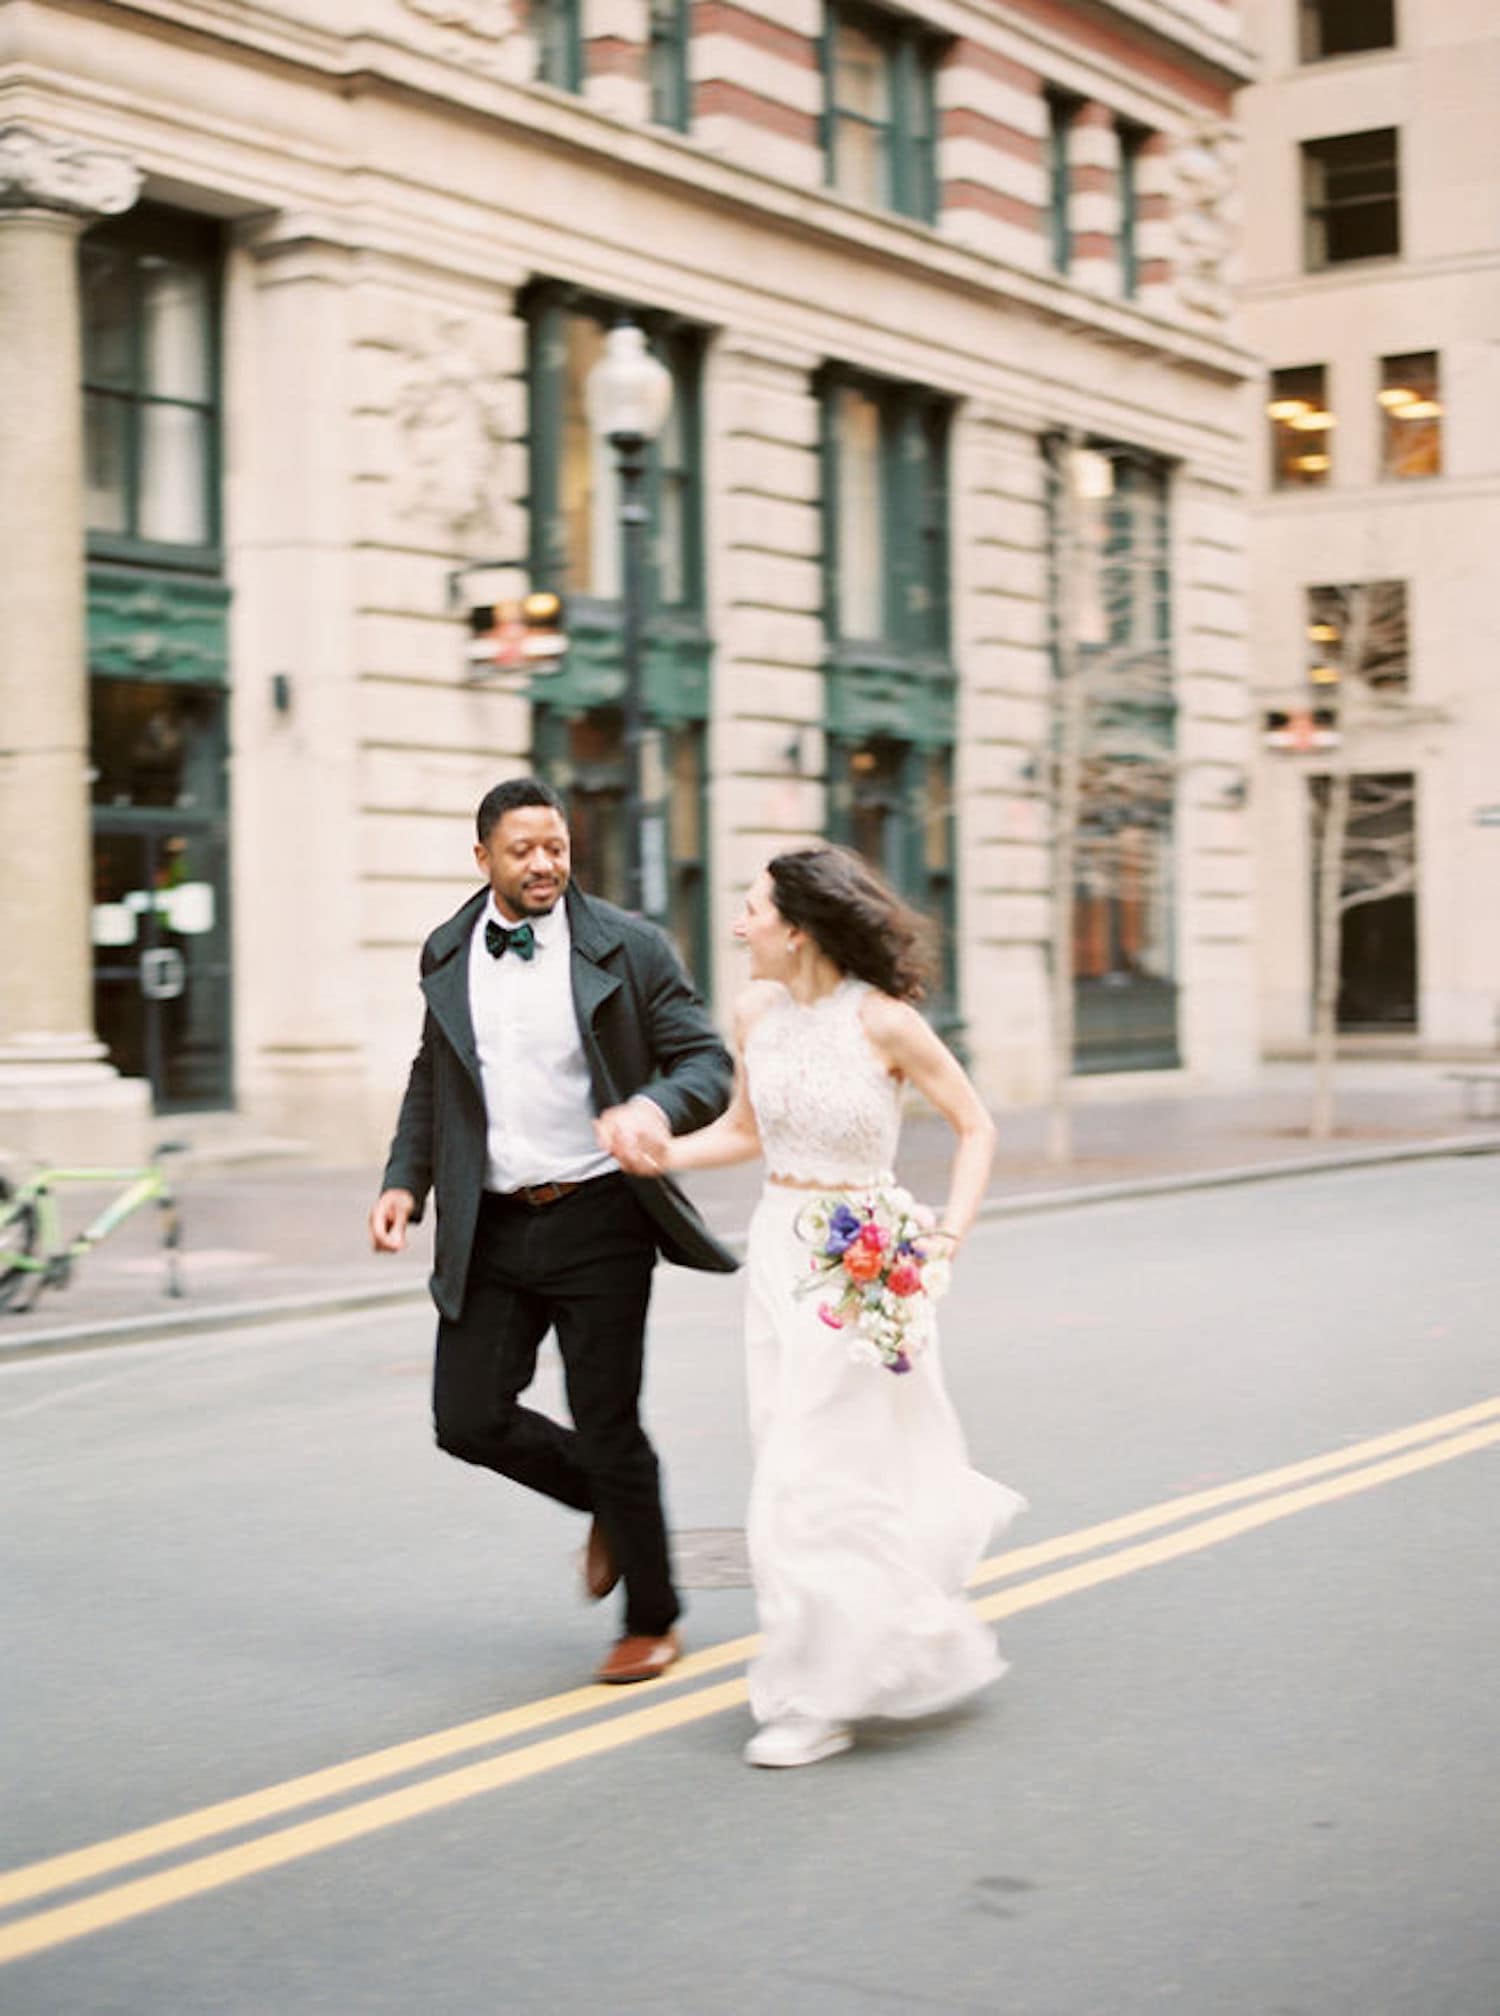 A newlywed couple holds hands as they run down the street in Boston, Massachusetts for their elopement. Photograph by Northshore, Massachusetts and Boston wedding photographer Marcela Plosker.